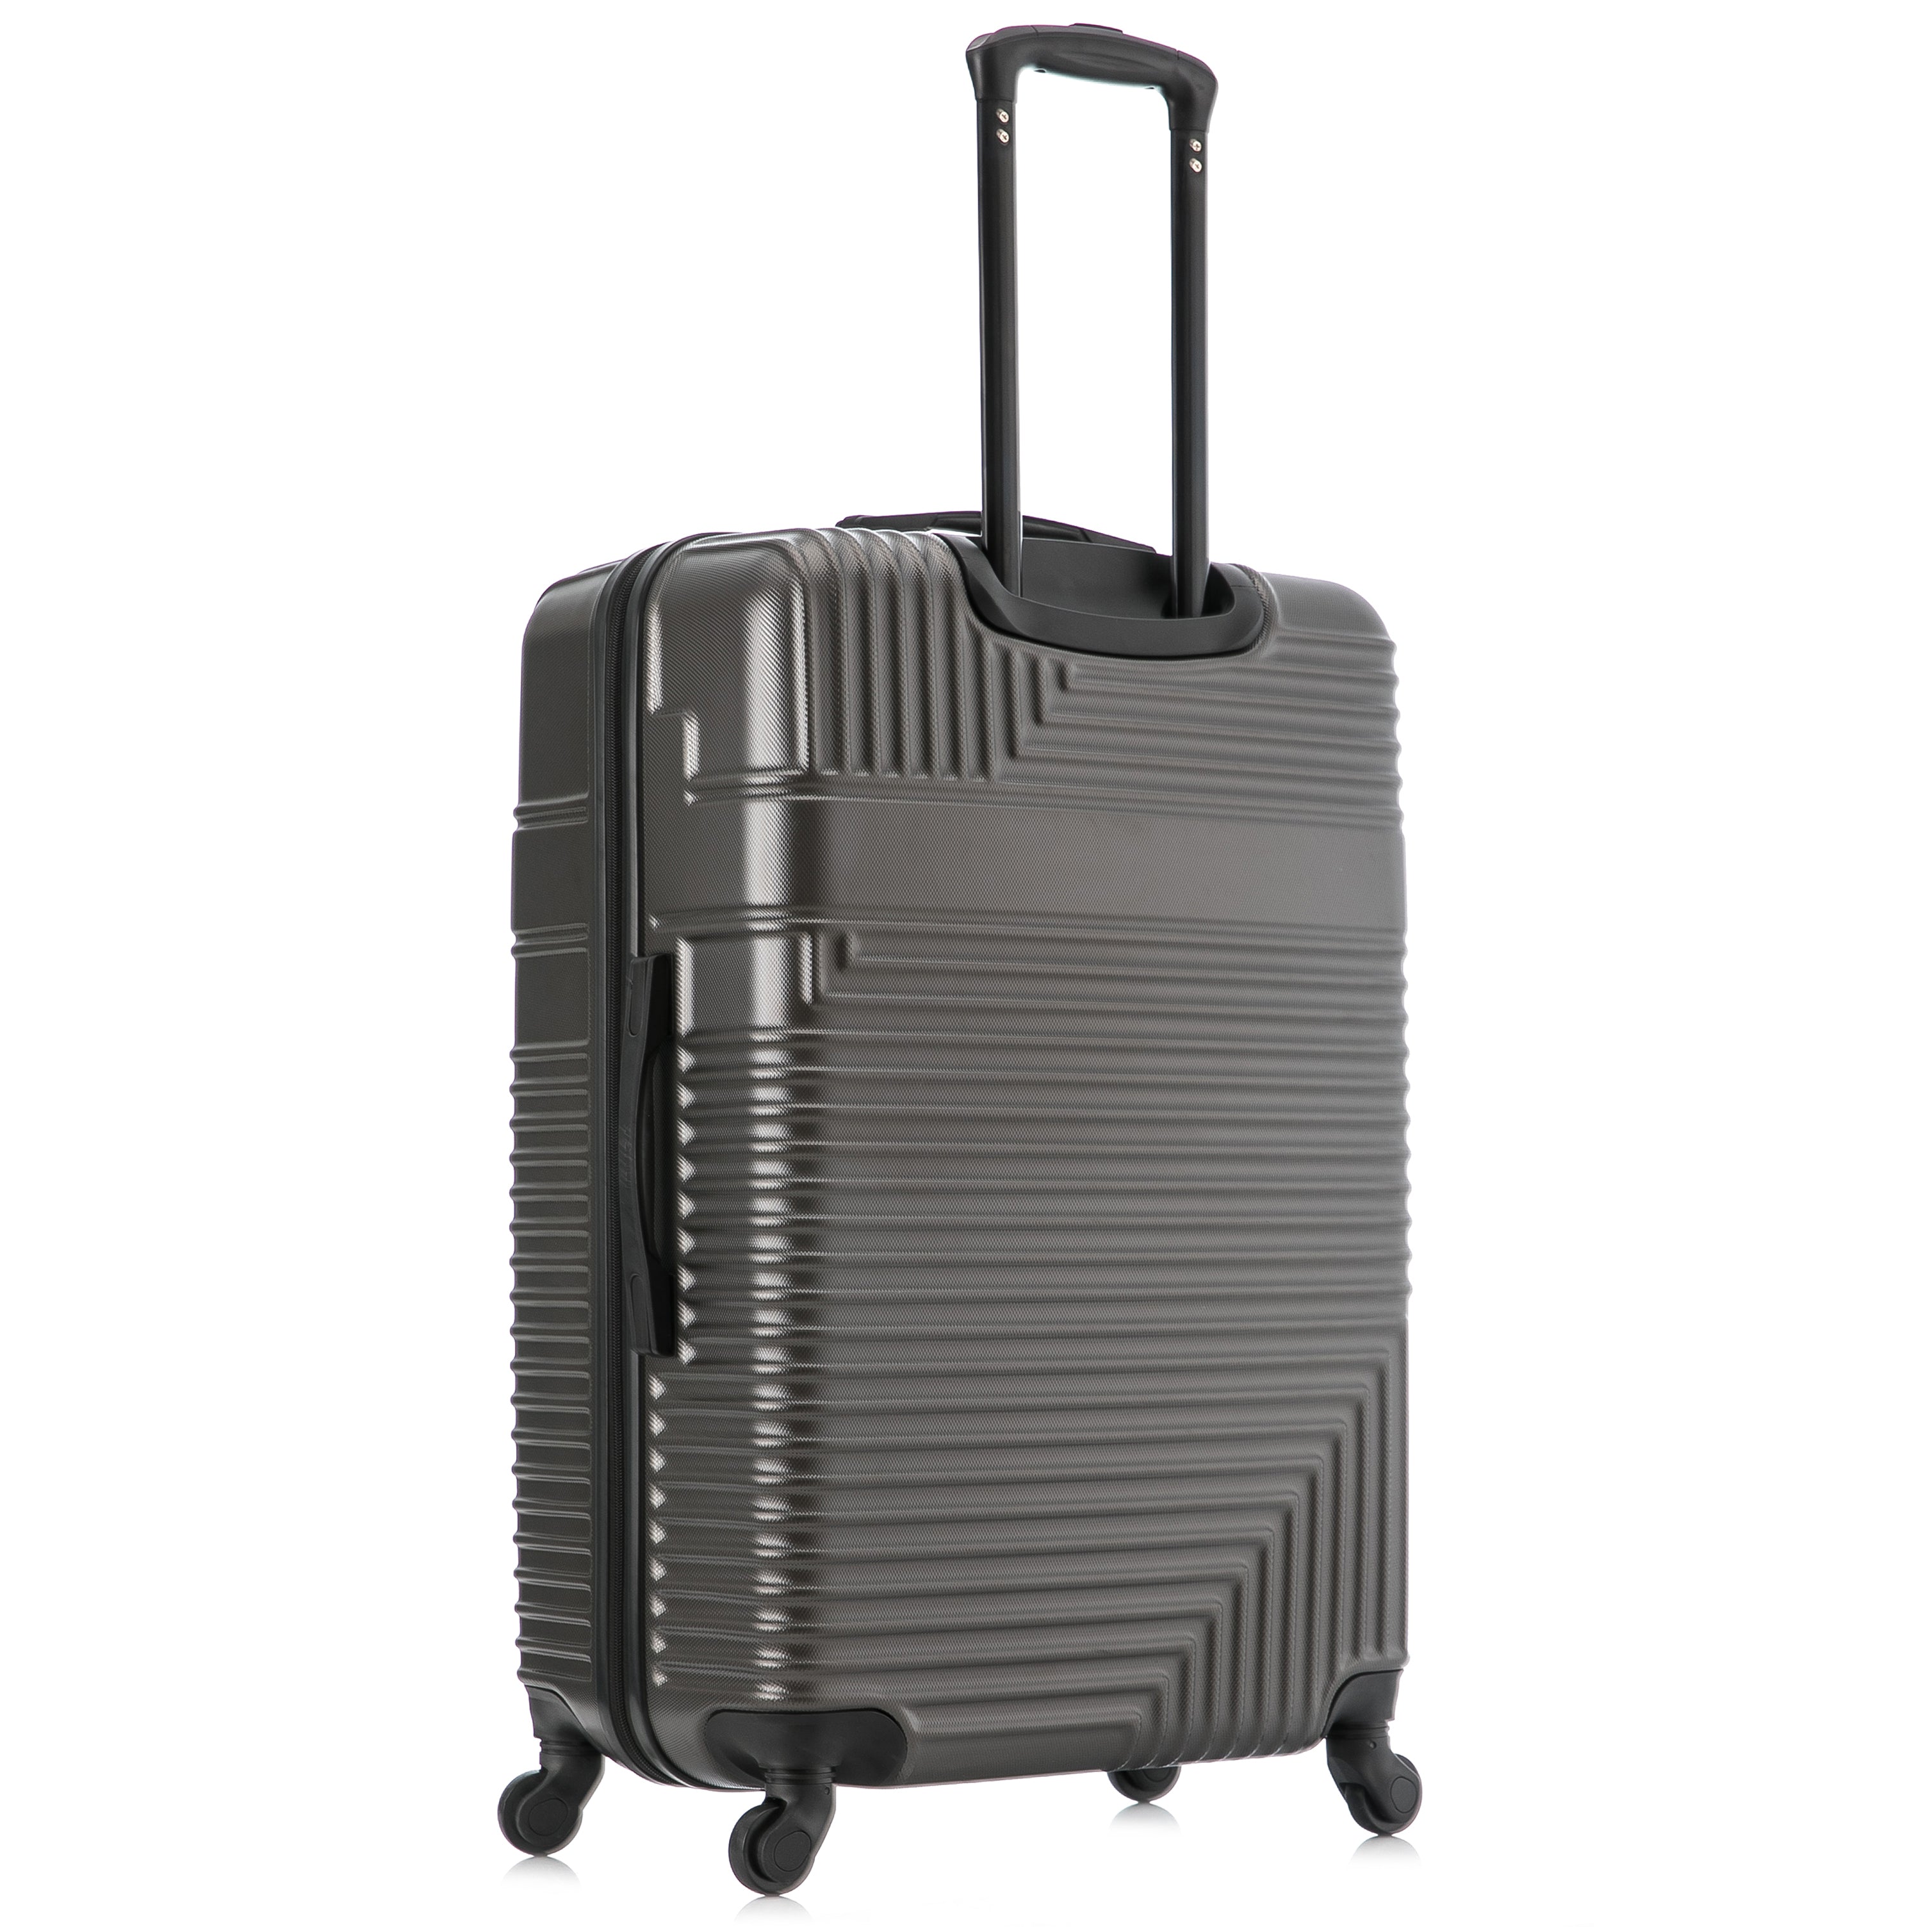 InUSA Resilience Lightweight Hardside Spinner 3 Piece Luggage set  20'',24'', 28'' inch Charcoal